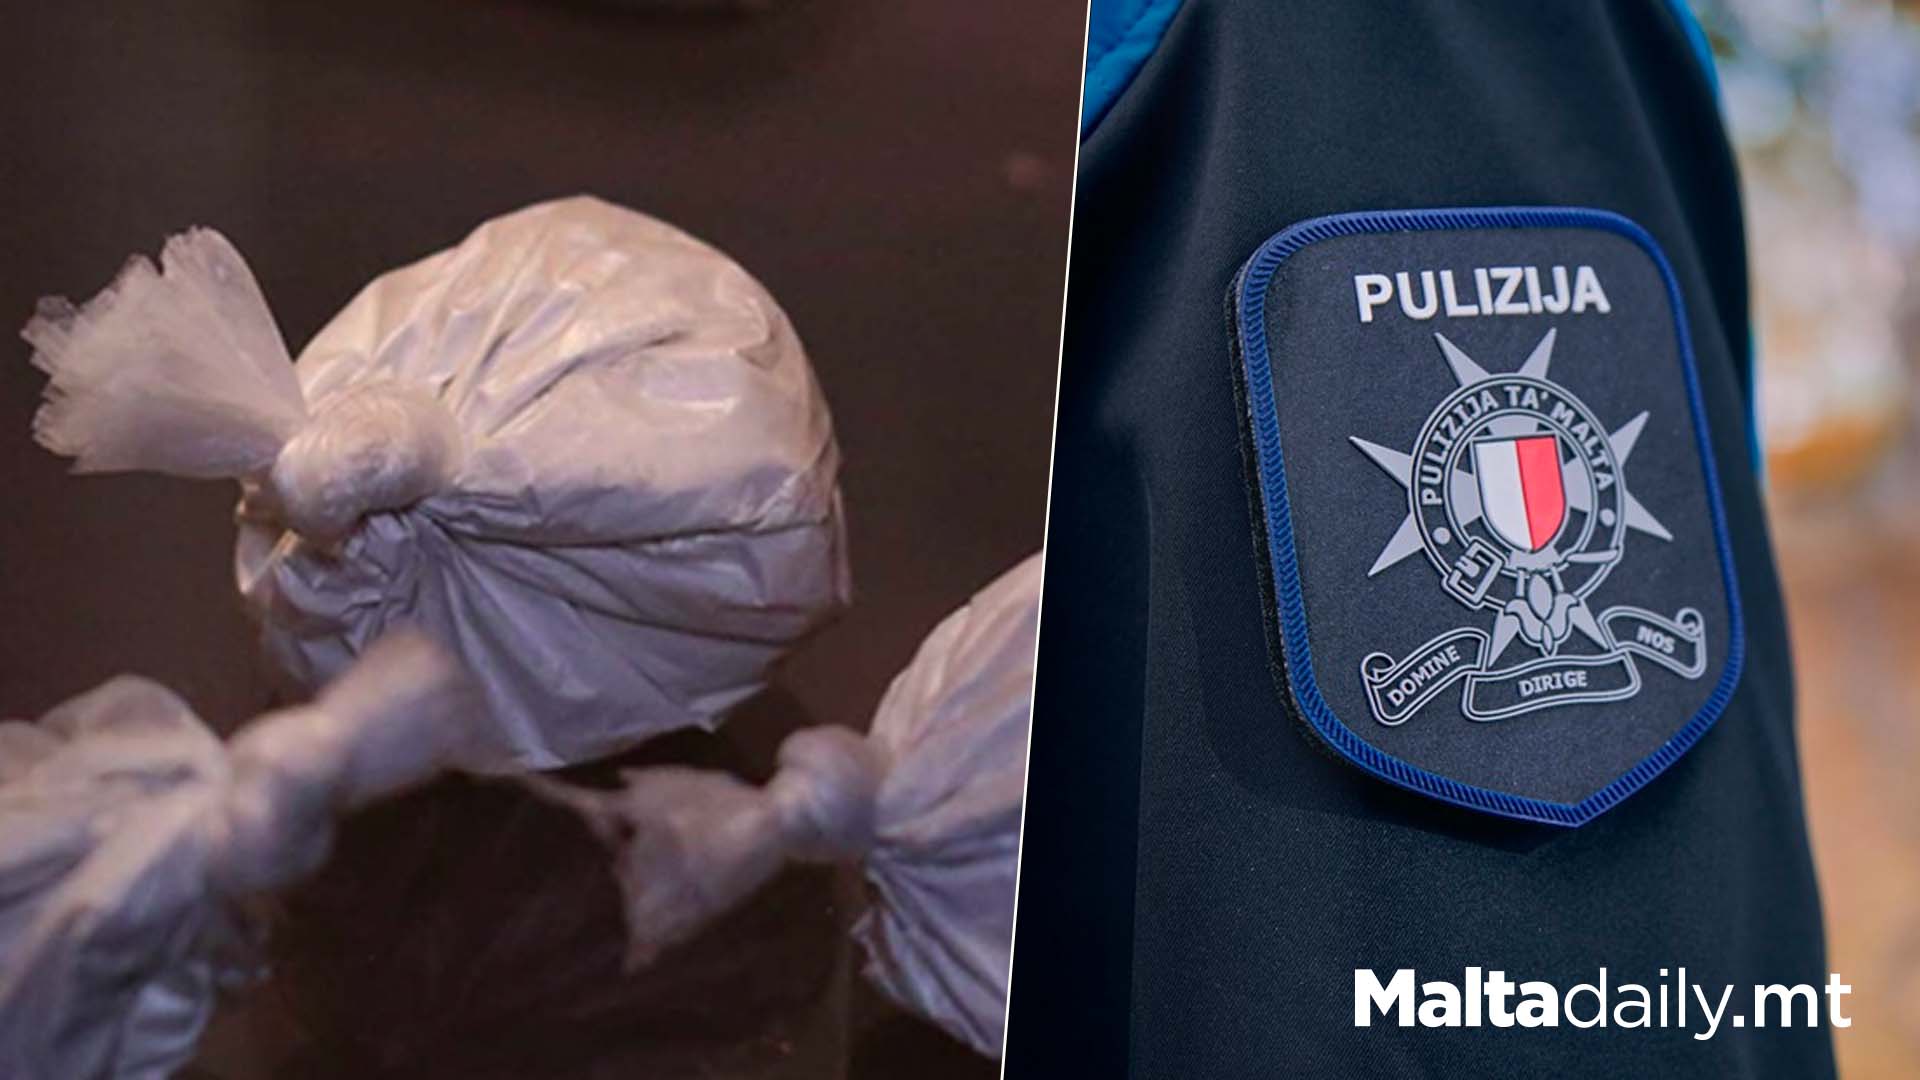 Police Confiscate €300,000 Worth Of Cocaine During Transaction